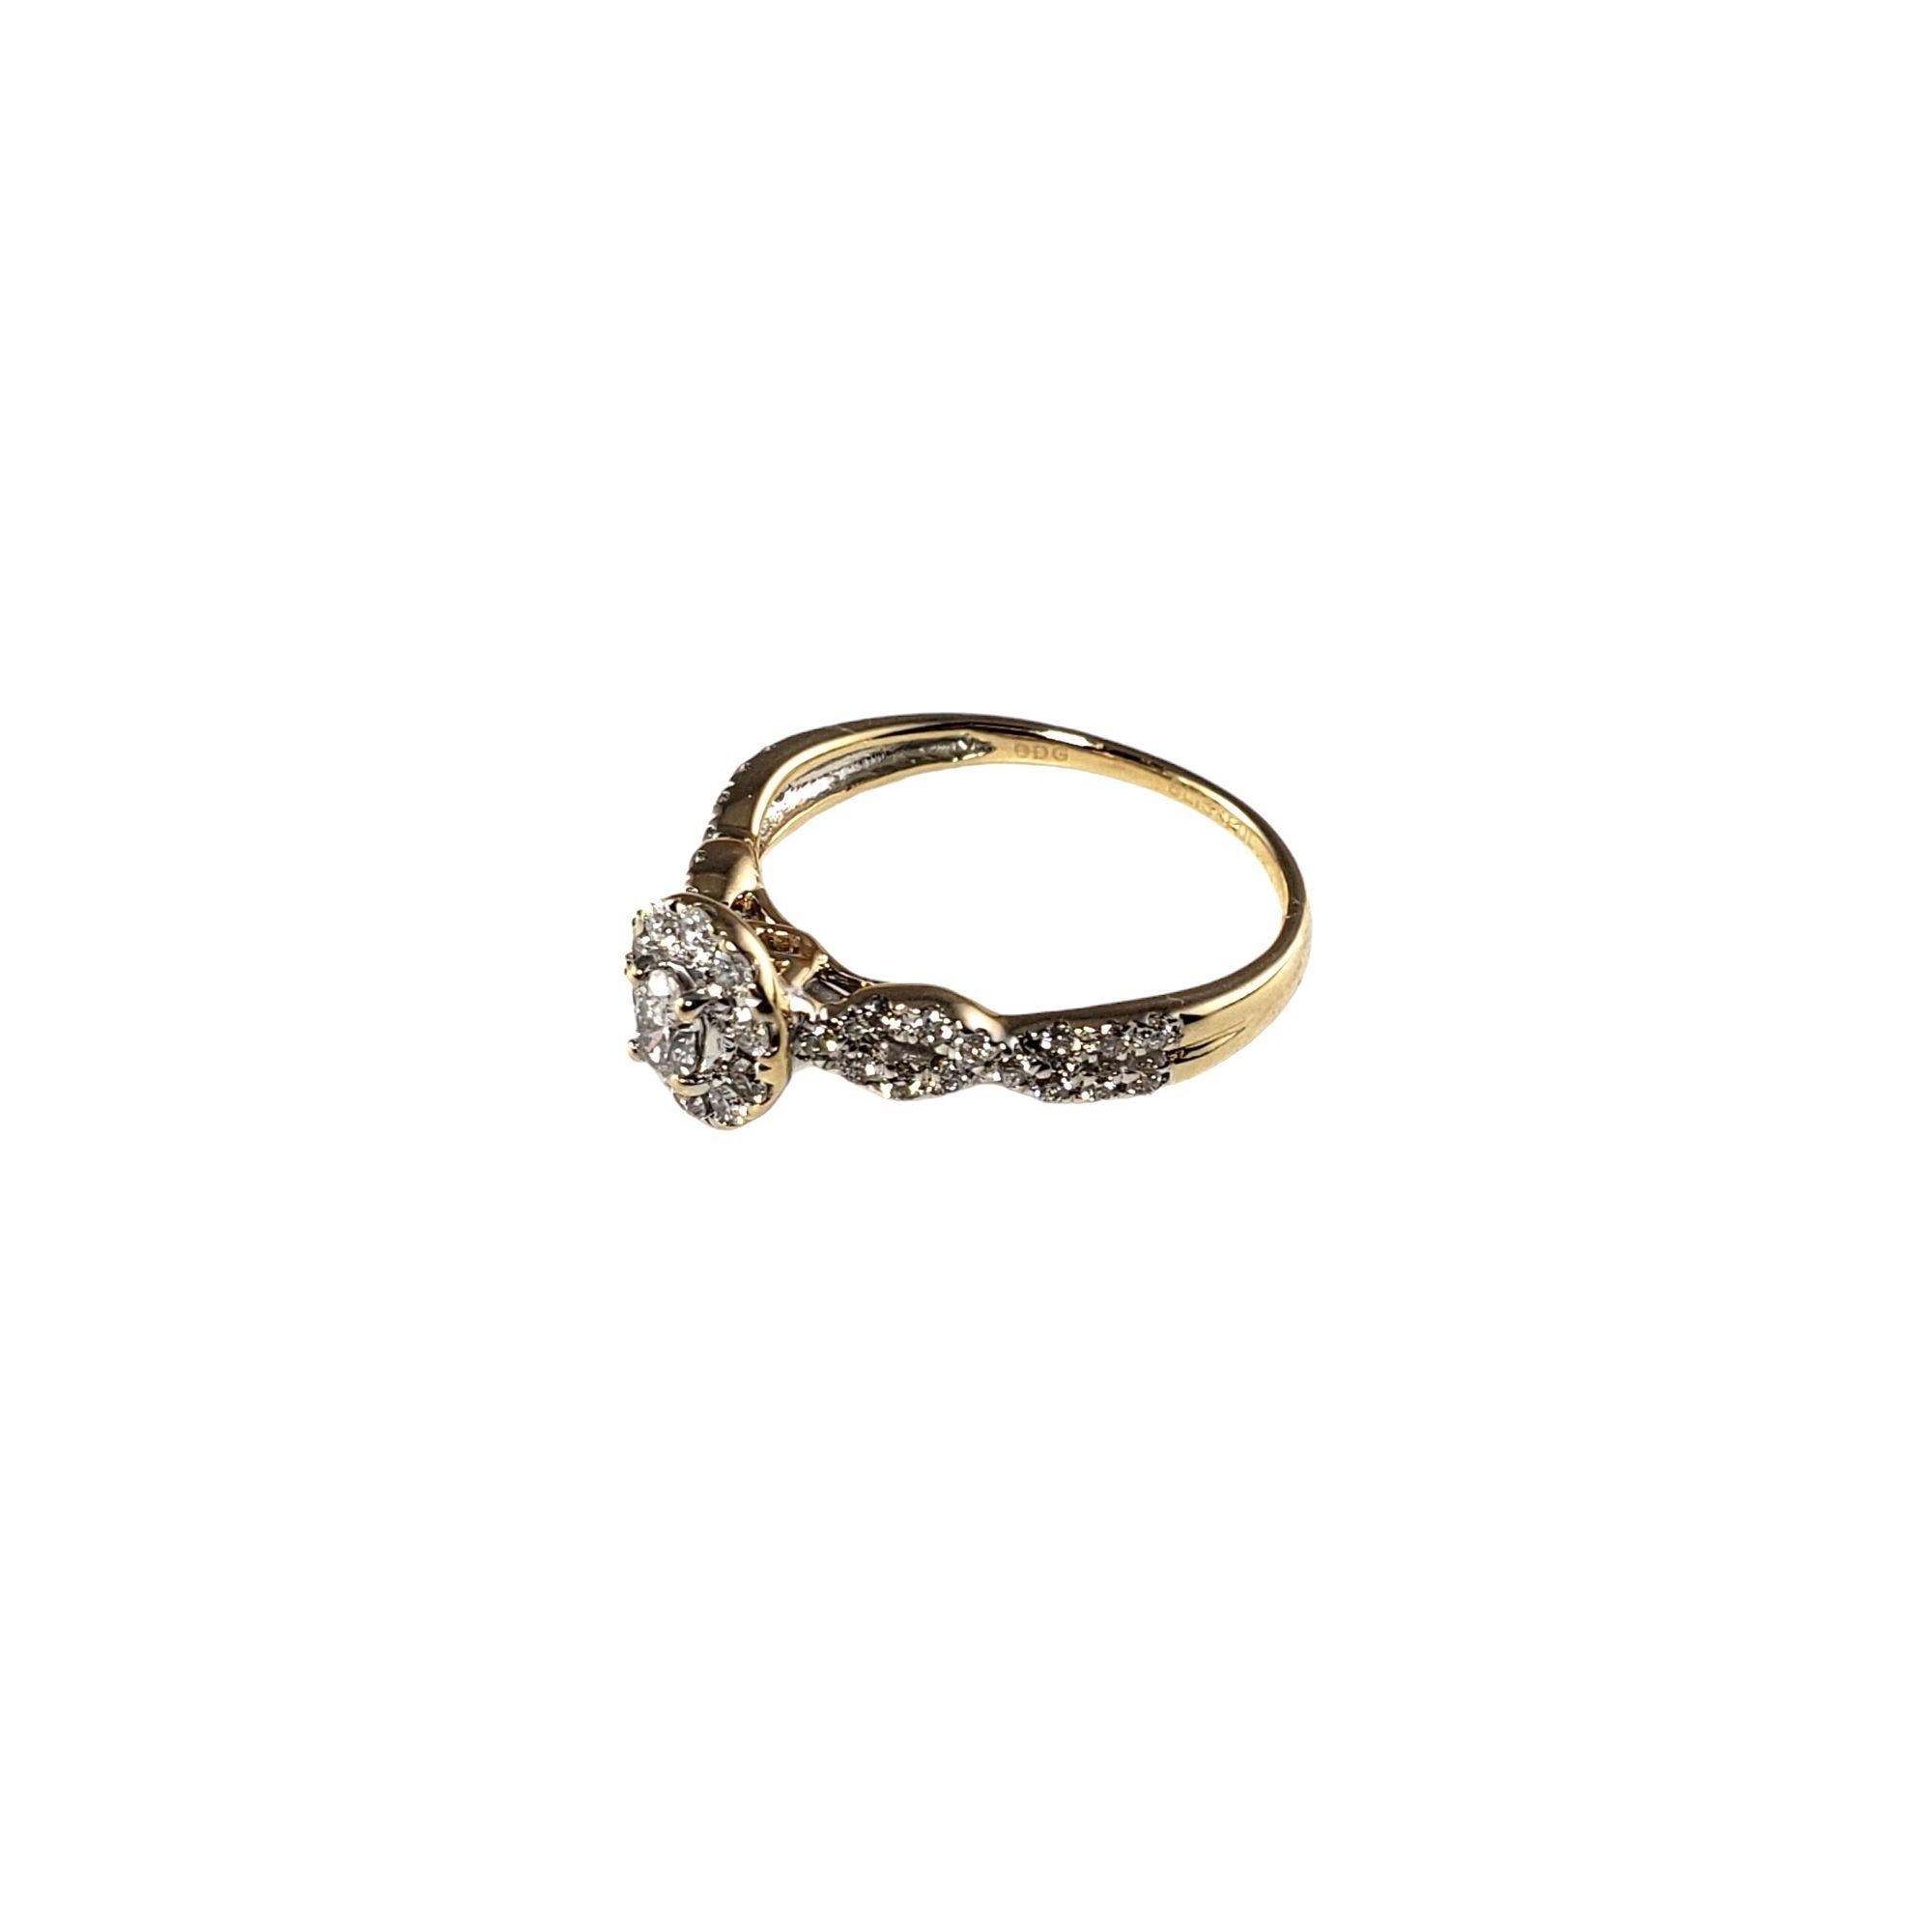 Vintage 14 Karat Yellow Gold and Diamond Ring Size 7-

This sparkling ring features one oval cut diamond (.22 ct.) and 48 round brilliant cut diamonds set in classic 14K yellow gold. Top of ring measures 8 mm x 7 mm. Shank: 1 mm.

Approximate total